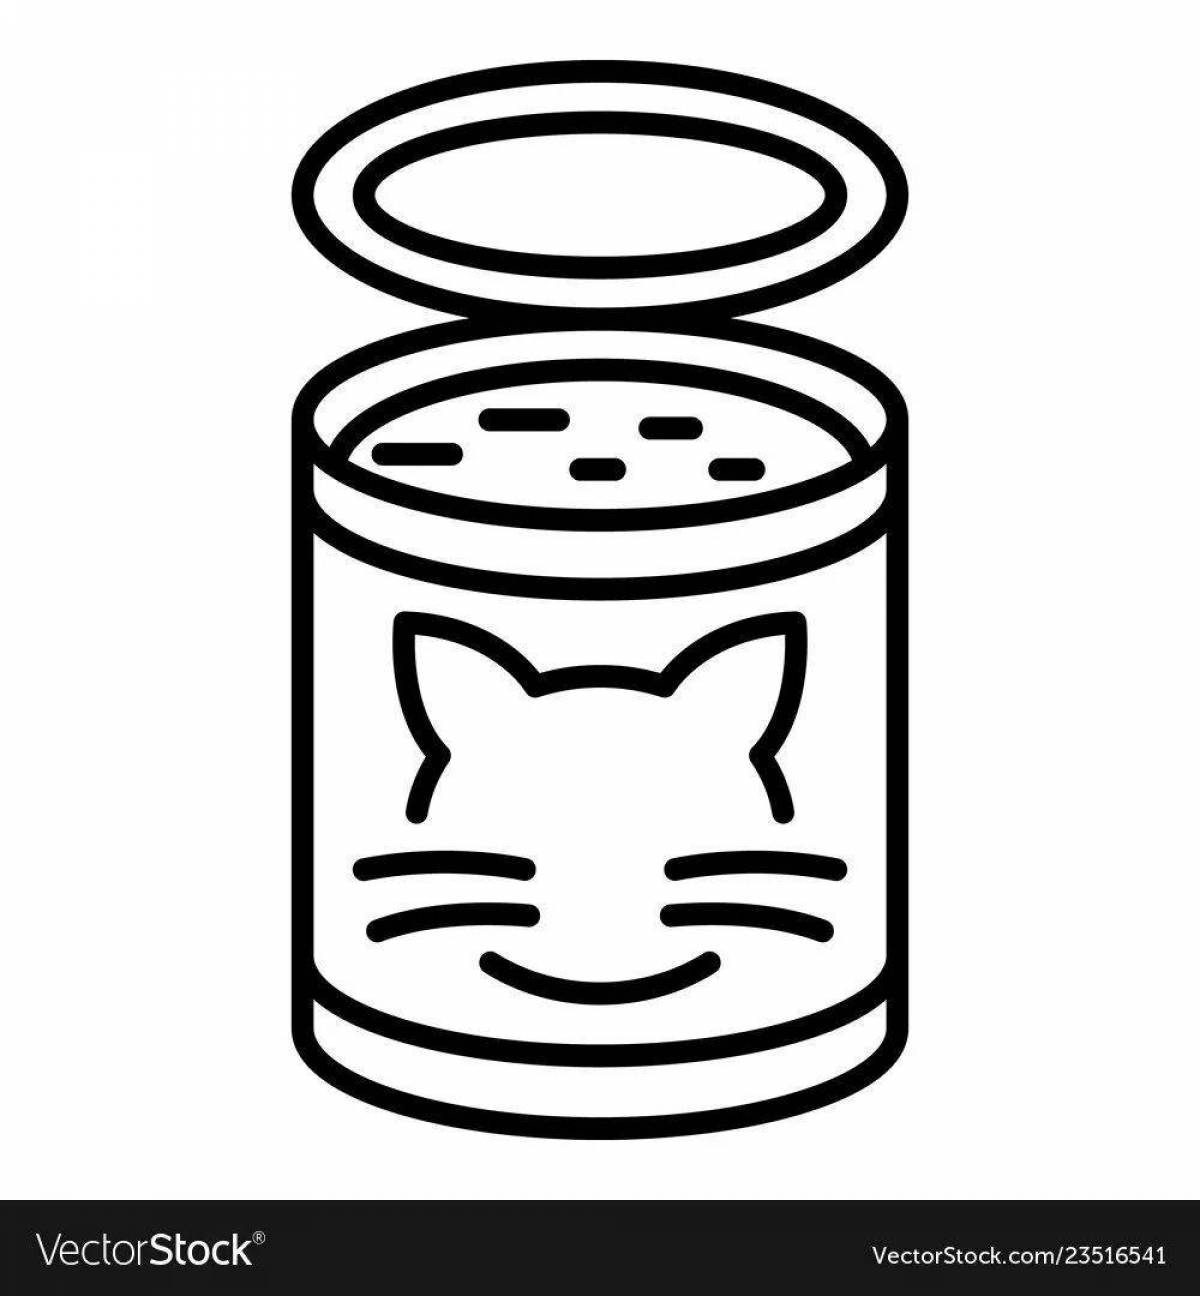 Dazzling cat food coloring page